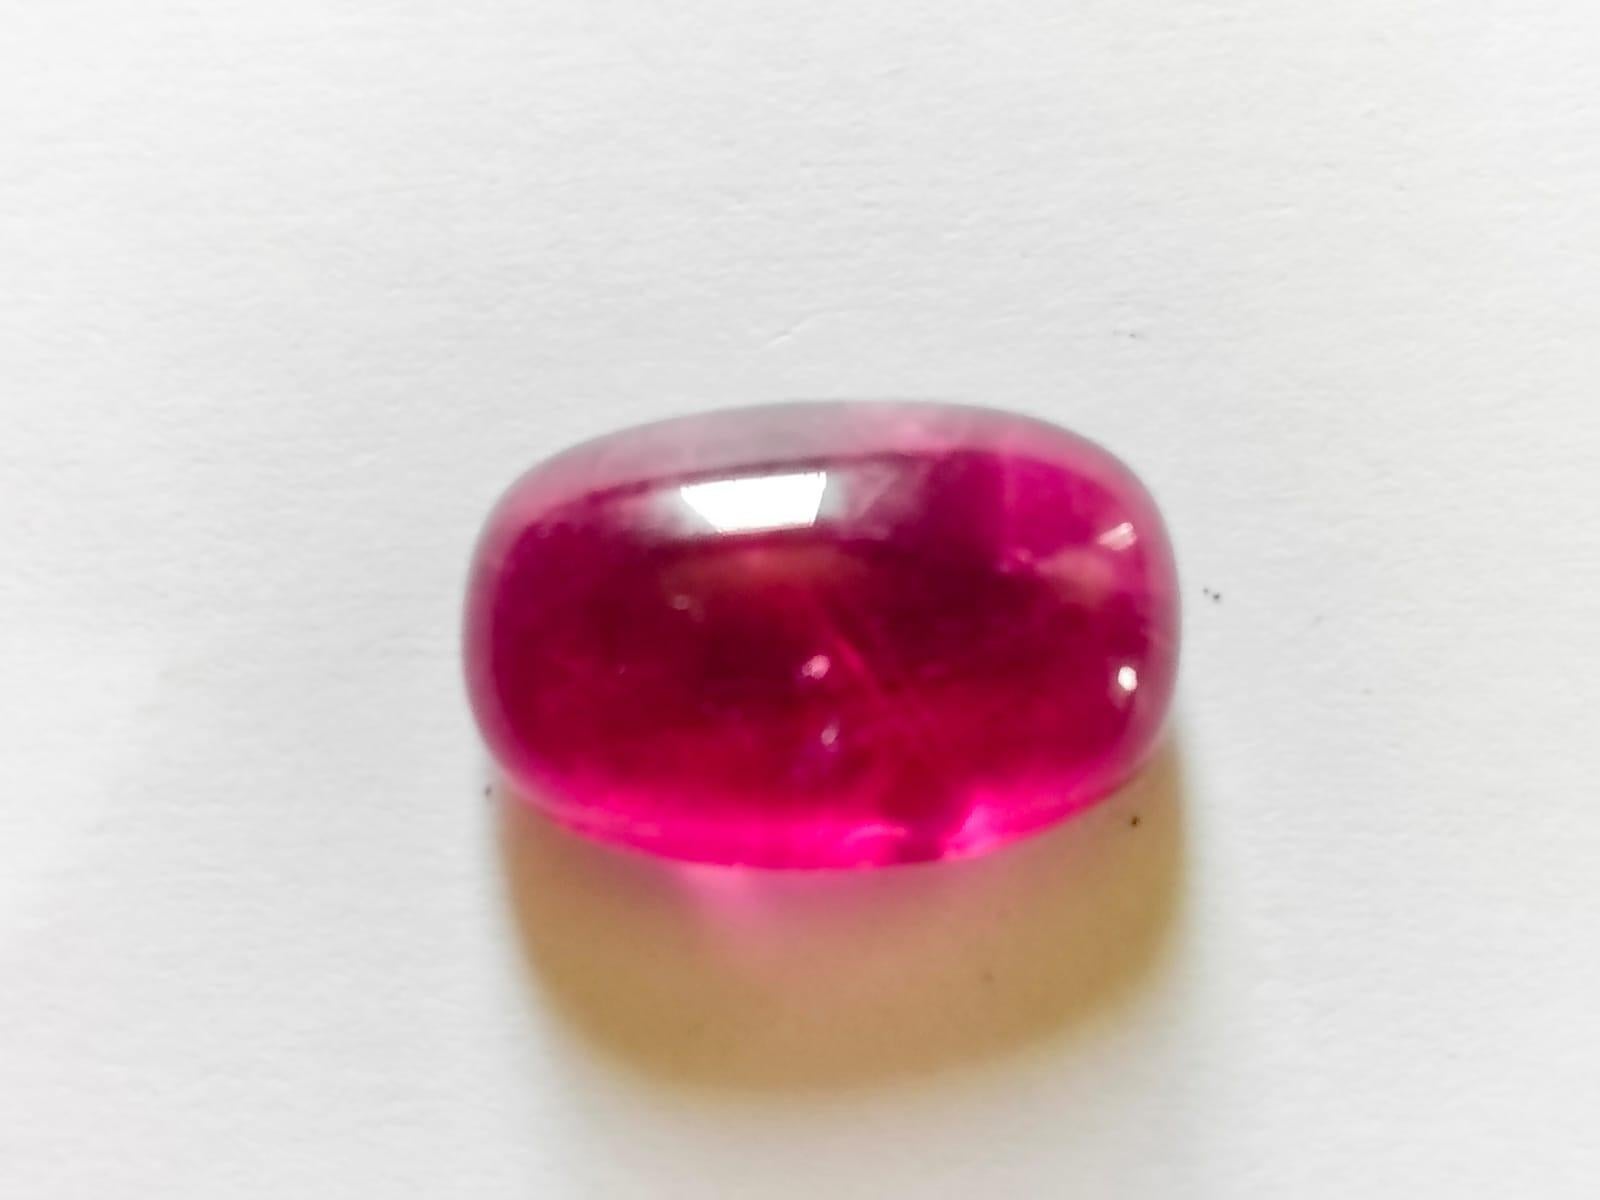 Natural Rubellite Cabochon Gemstone.
26.25 Carat with a elegant Red colour and excellent clarity. Also has an excellent fancy Cushion cut with ideal polish to show great shine and colour . It will look authentic in jewellery. The dimensions of the